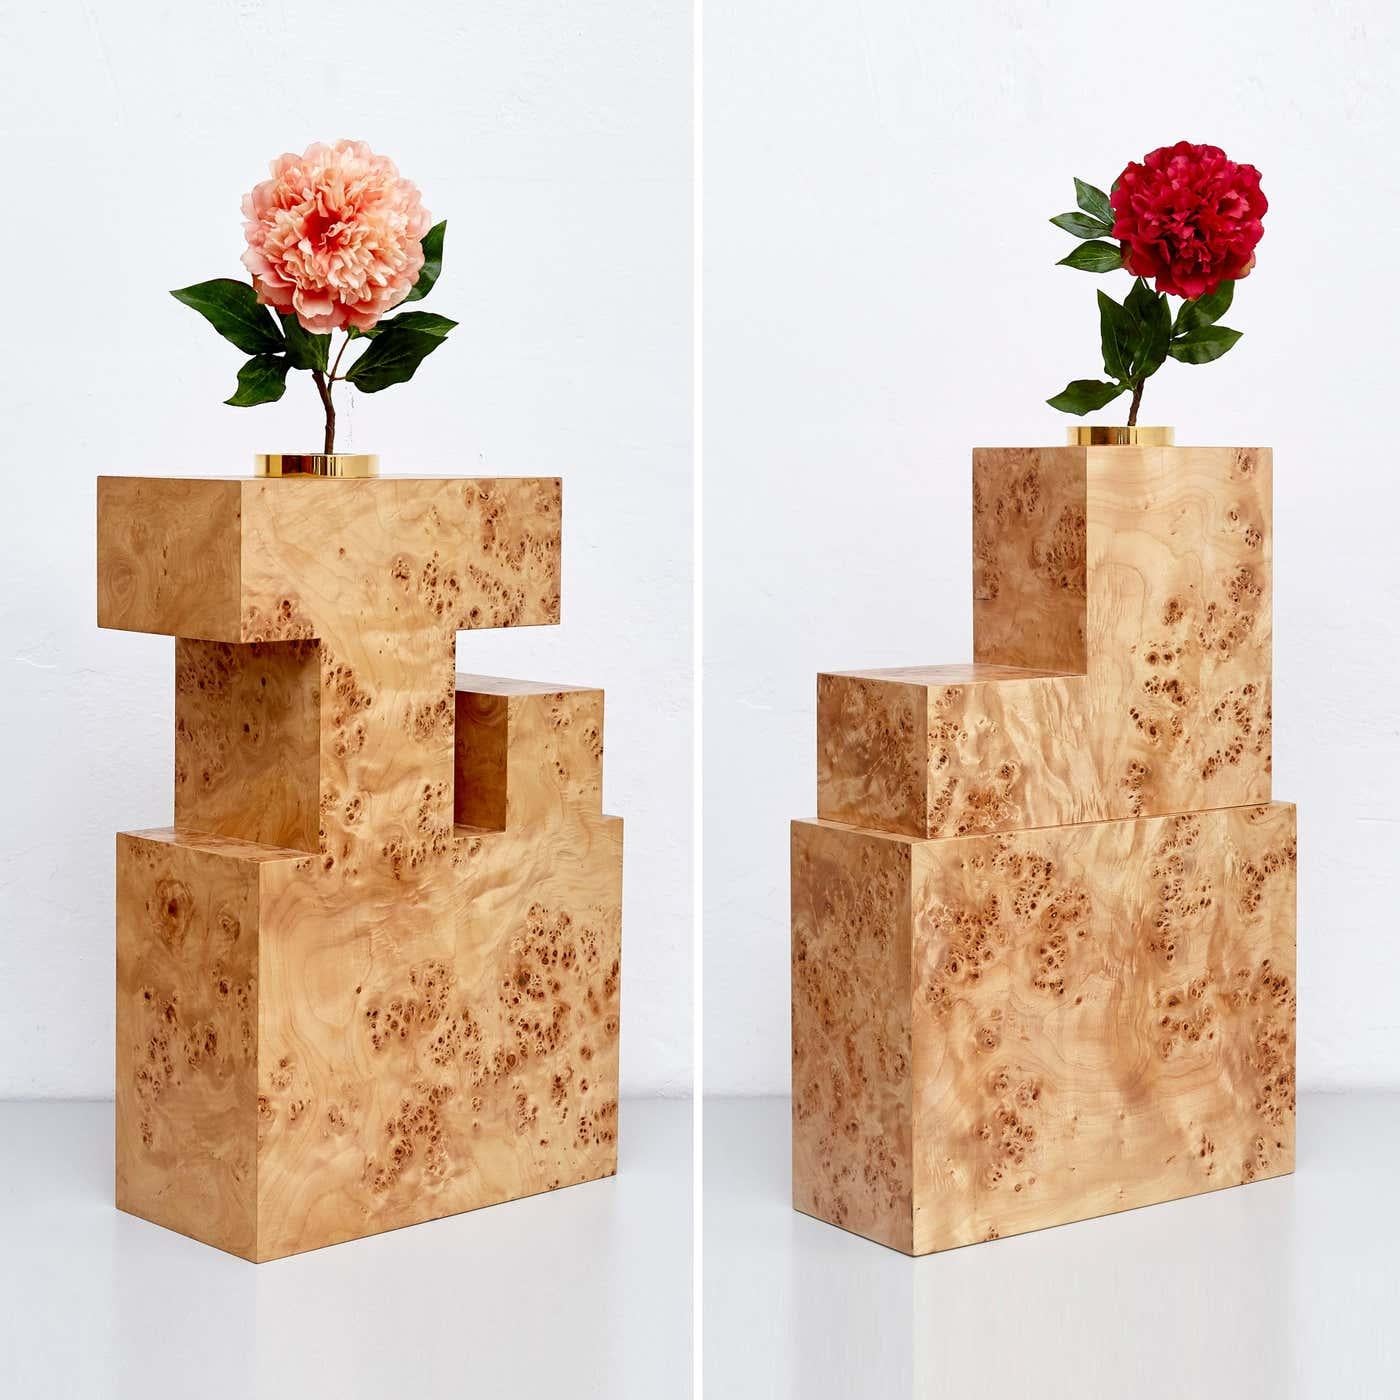 Presenting an extraordinary collection of twenty-six wood vases from the renowned 